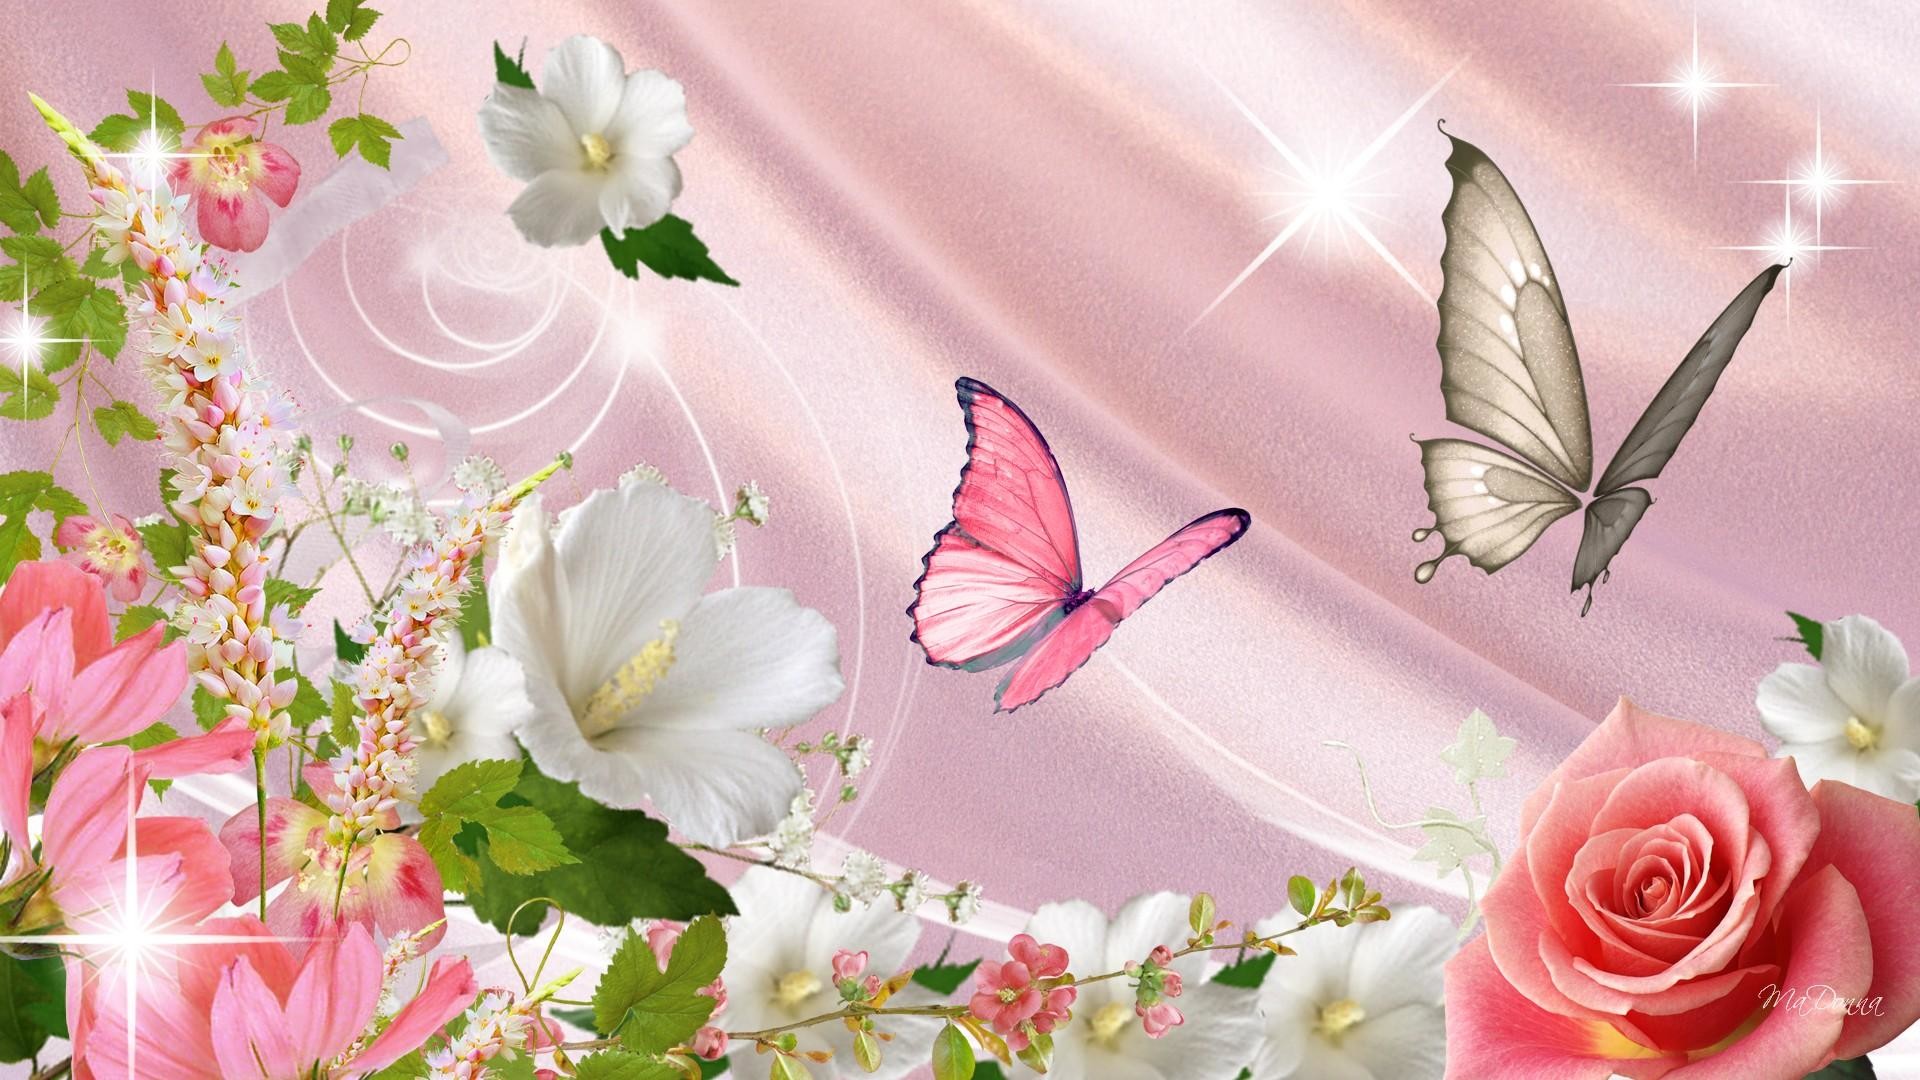 1920x1080 Spring-Flowers-And-Butterflies-Wallpaper-Photos- pics- images- pictures (13)